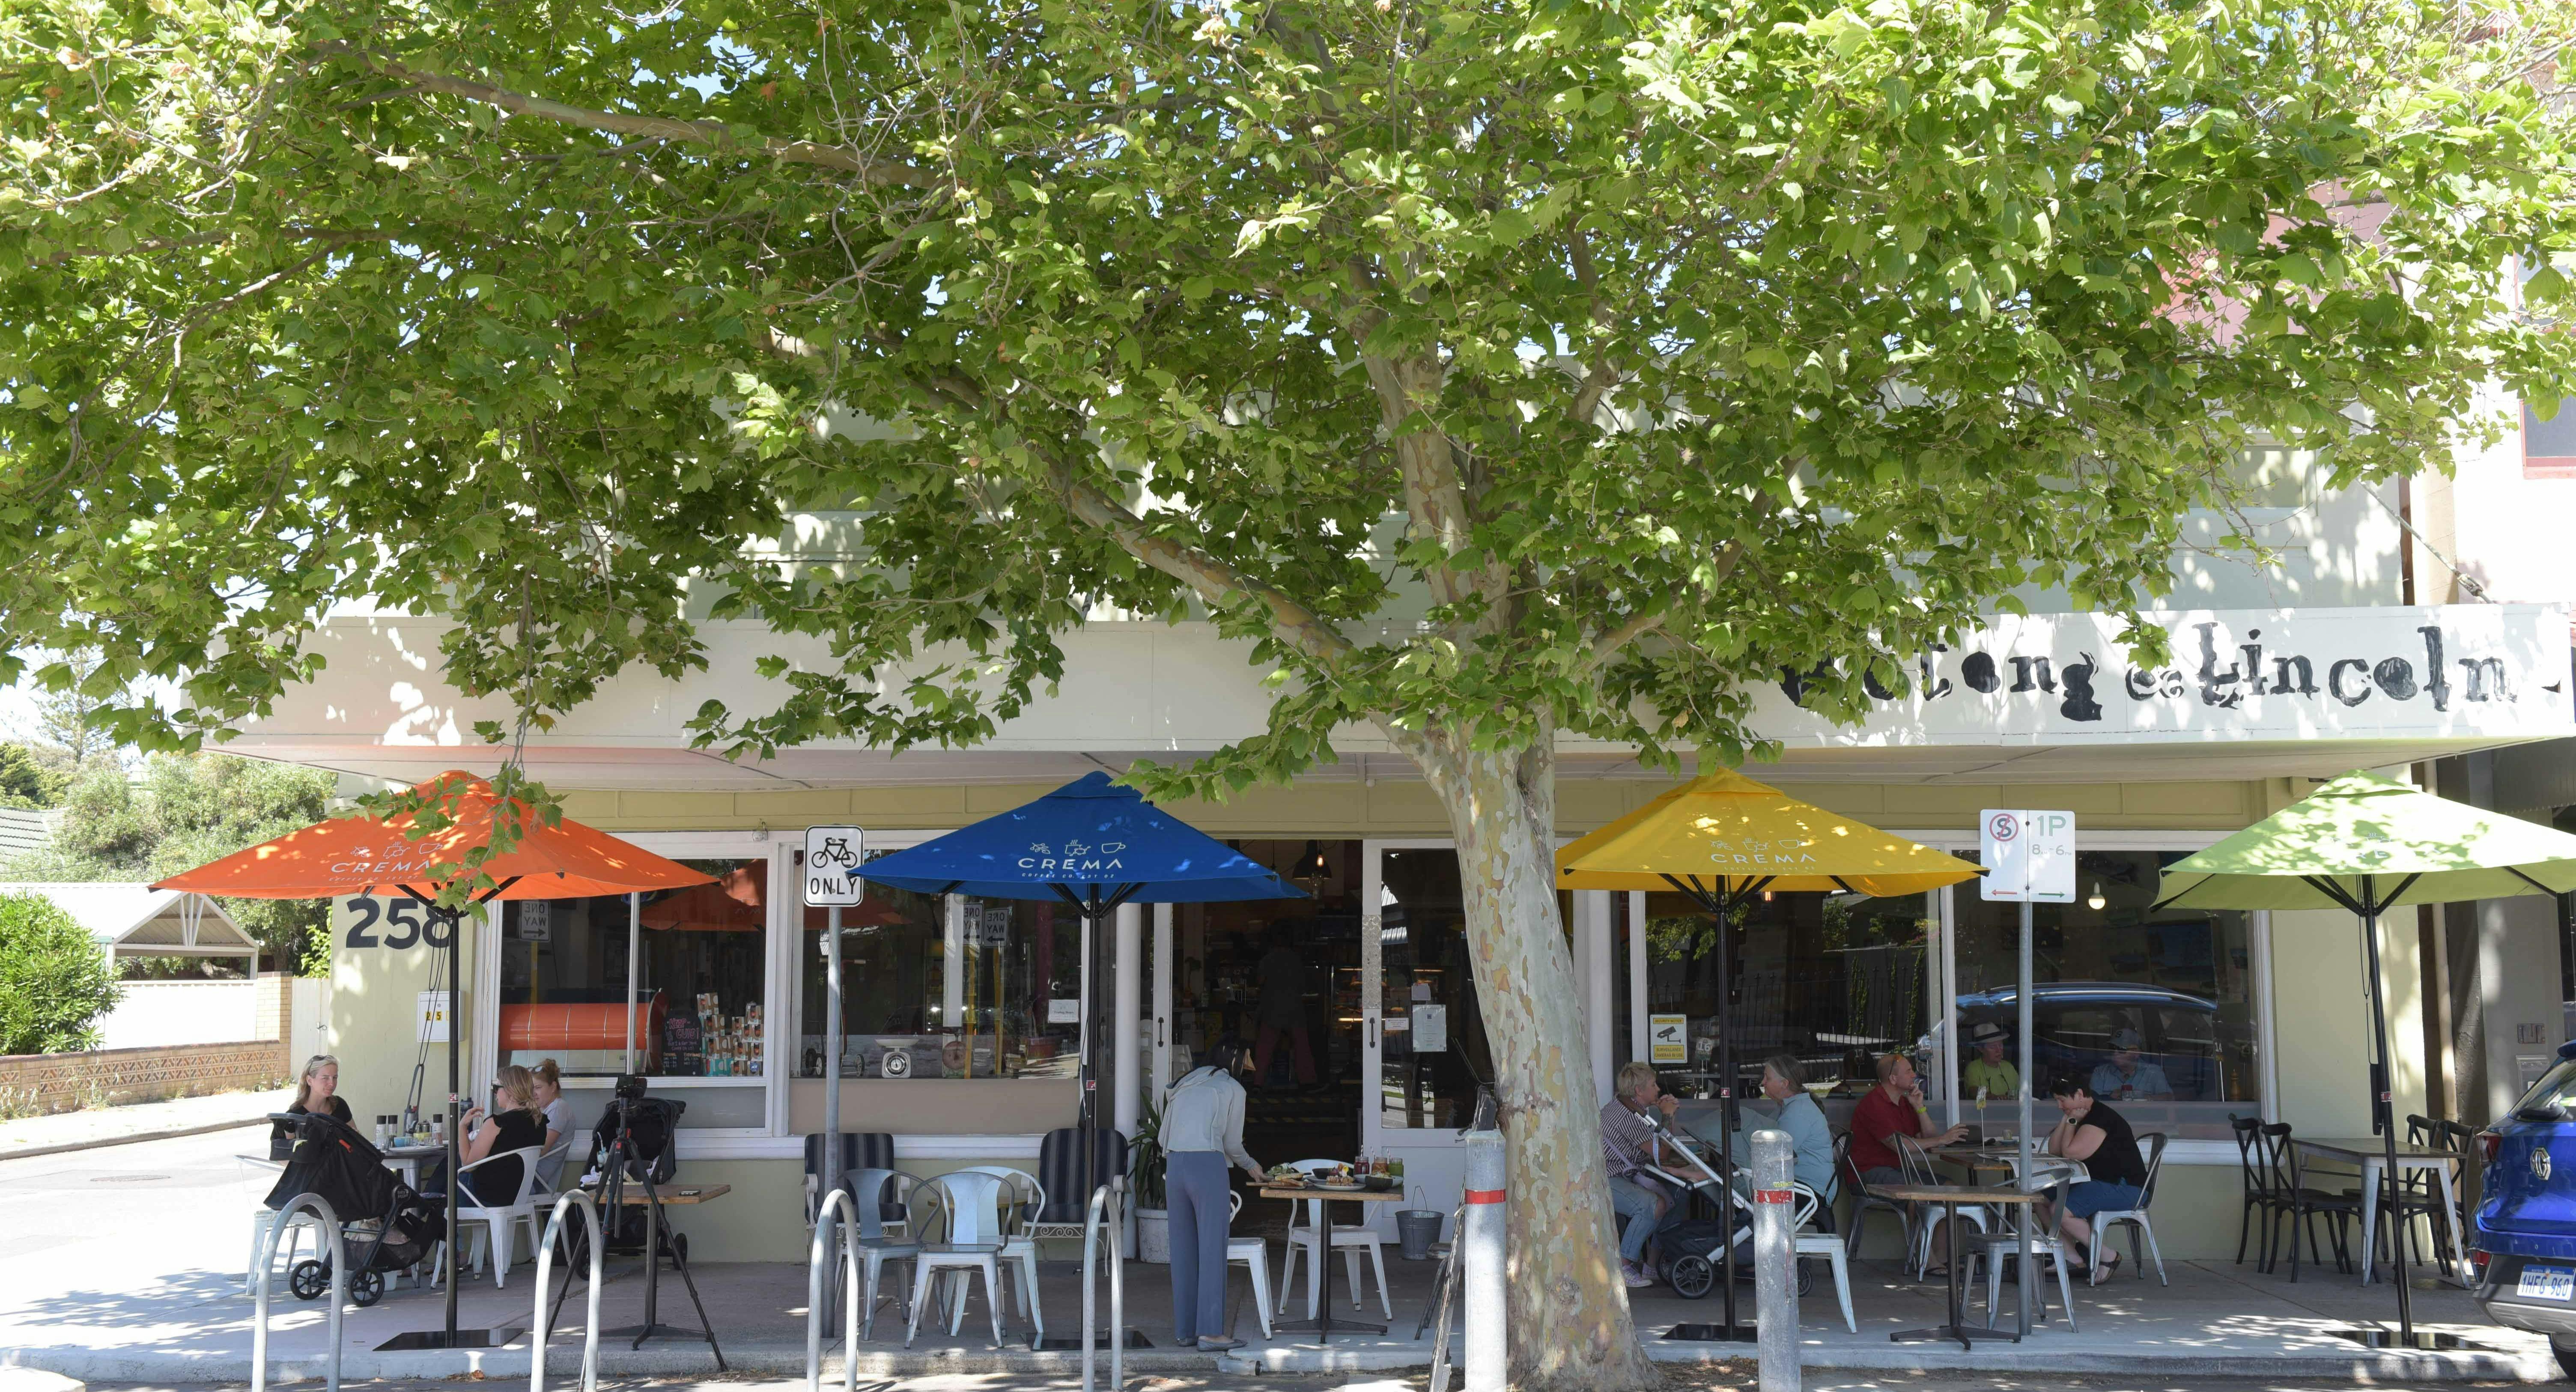 Photo of restaurant Ootong & Lincoln in South Fremantle, Perth